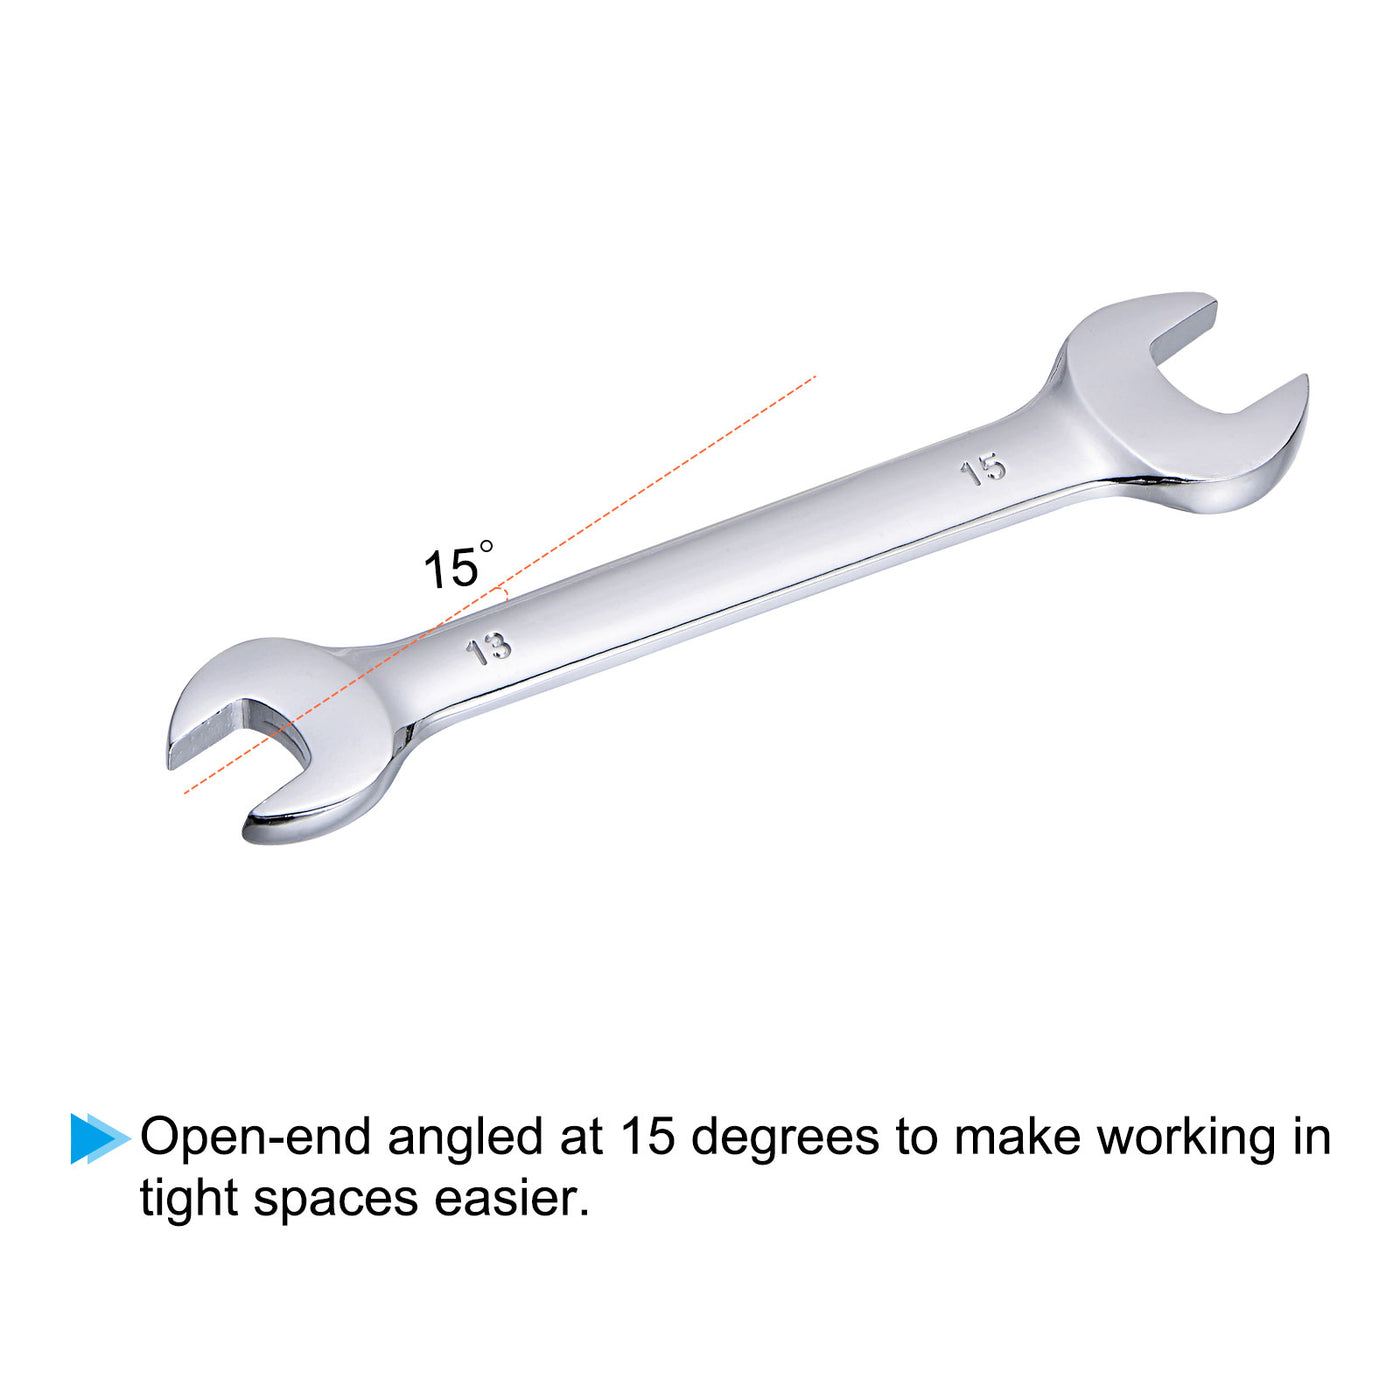 uxcell Uxcell Double Open-End Wrench Set, 5.5-16mm Metric CR-V with Rolling Pouch, 6-Piece